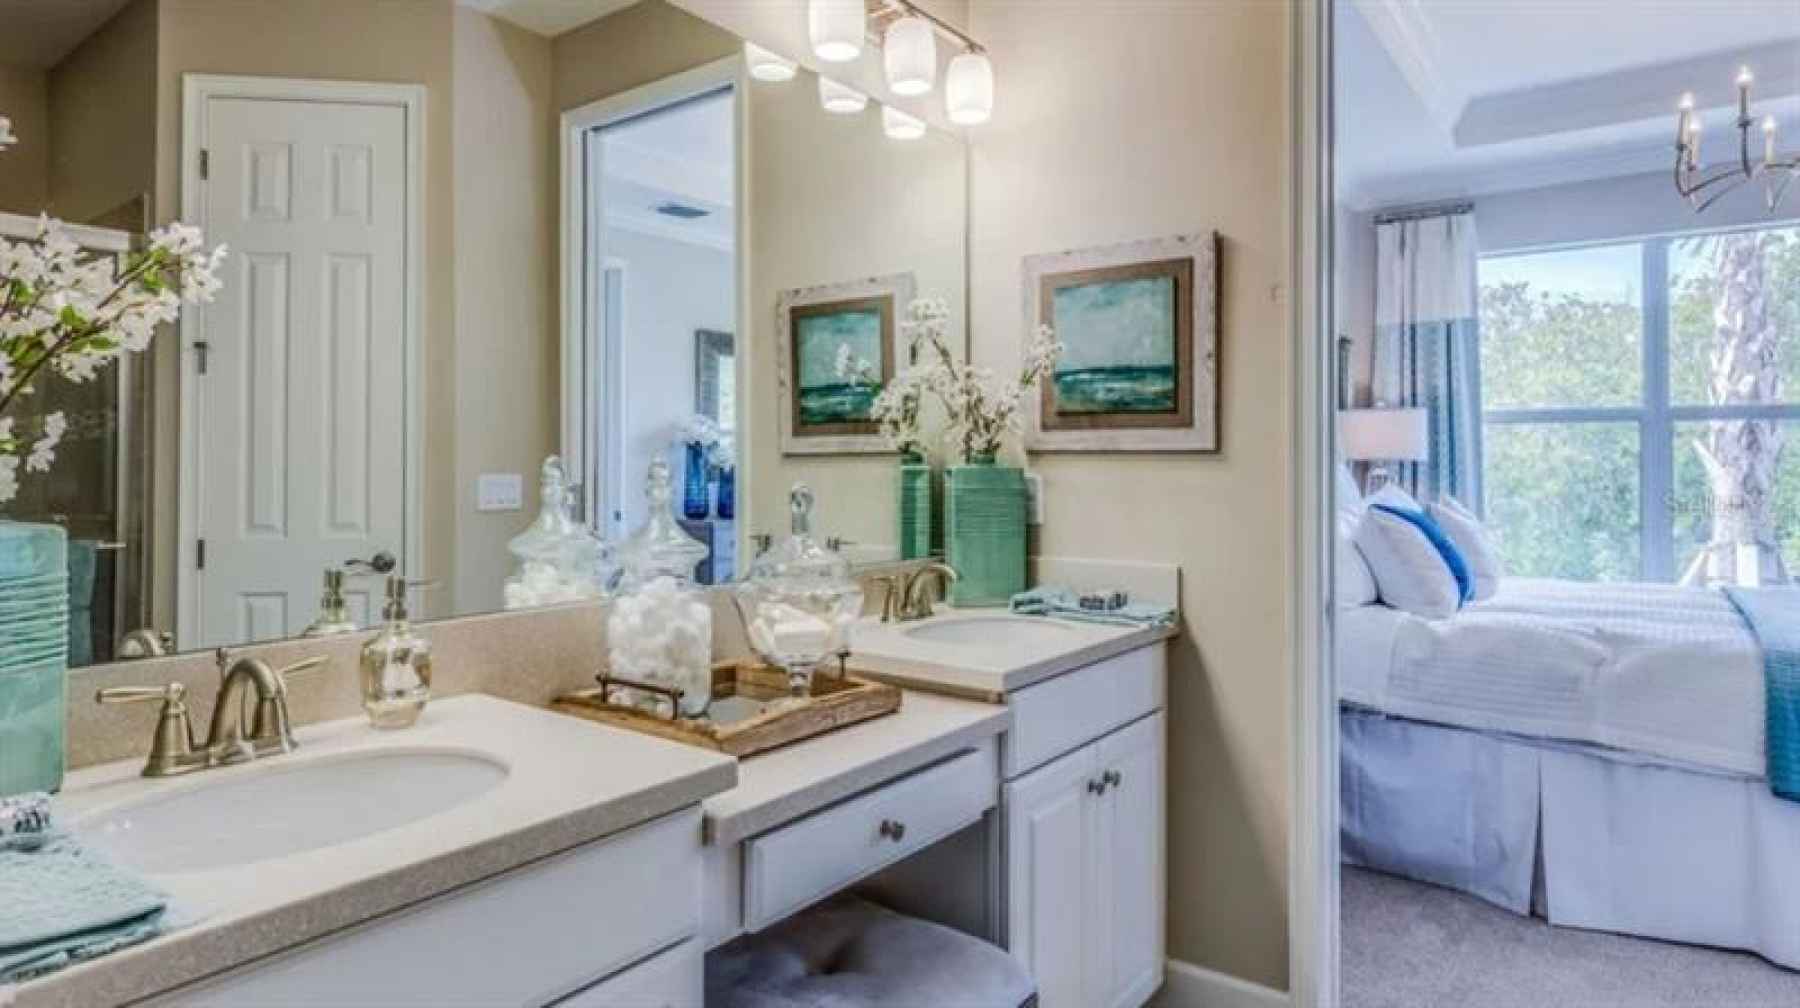 * REPRESENTATIVE PHOTO. The owner???s suite bathroom features dual sinks, extra cabinet space and pl